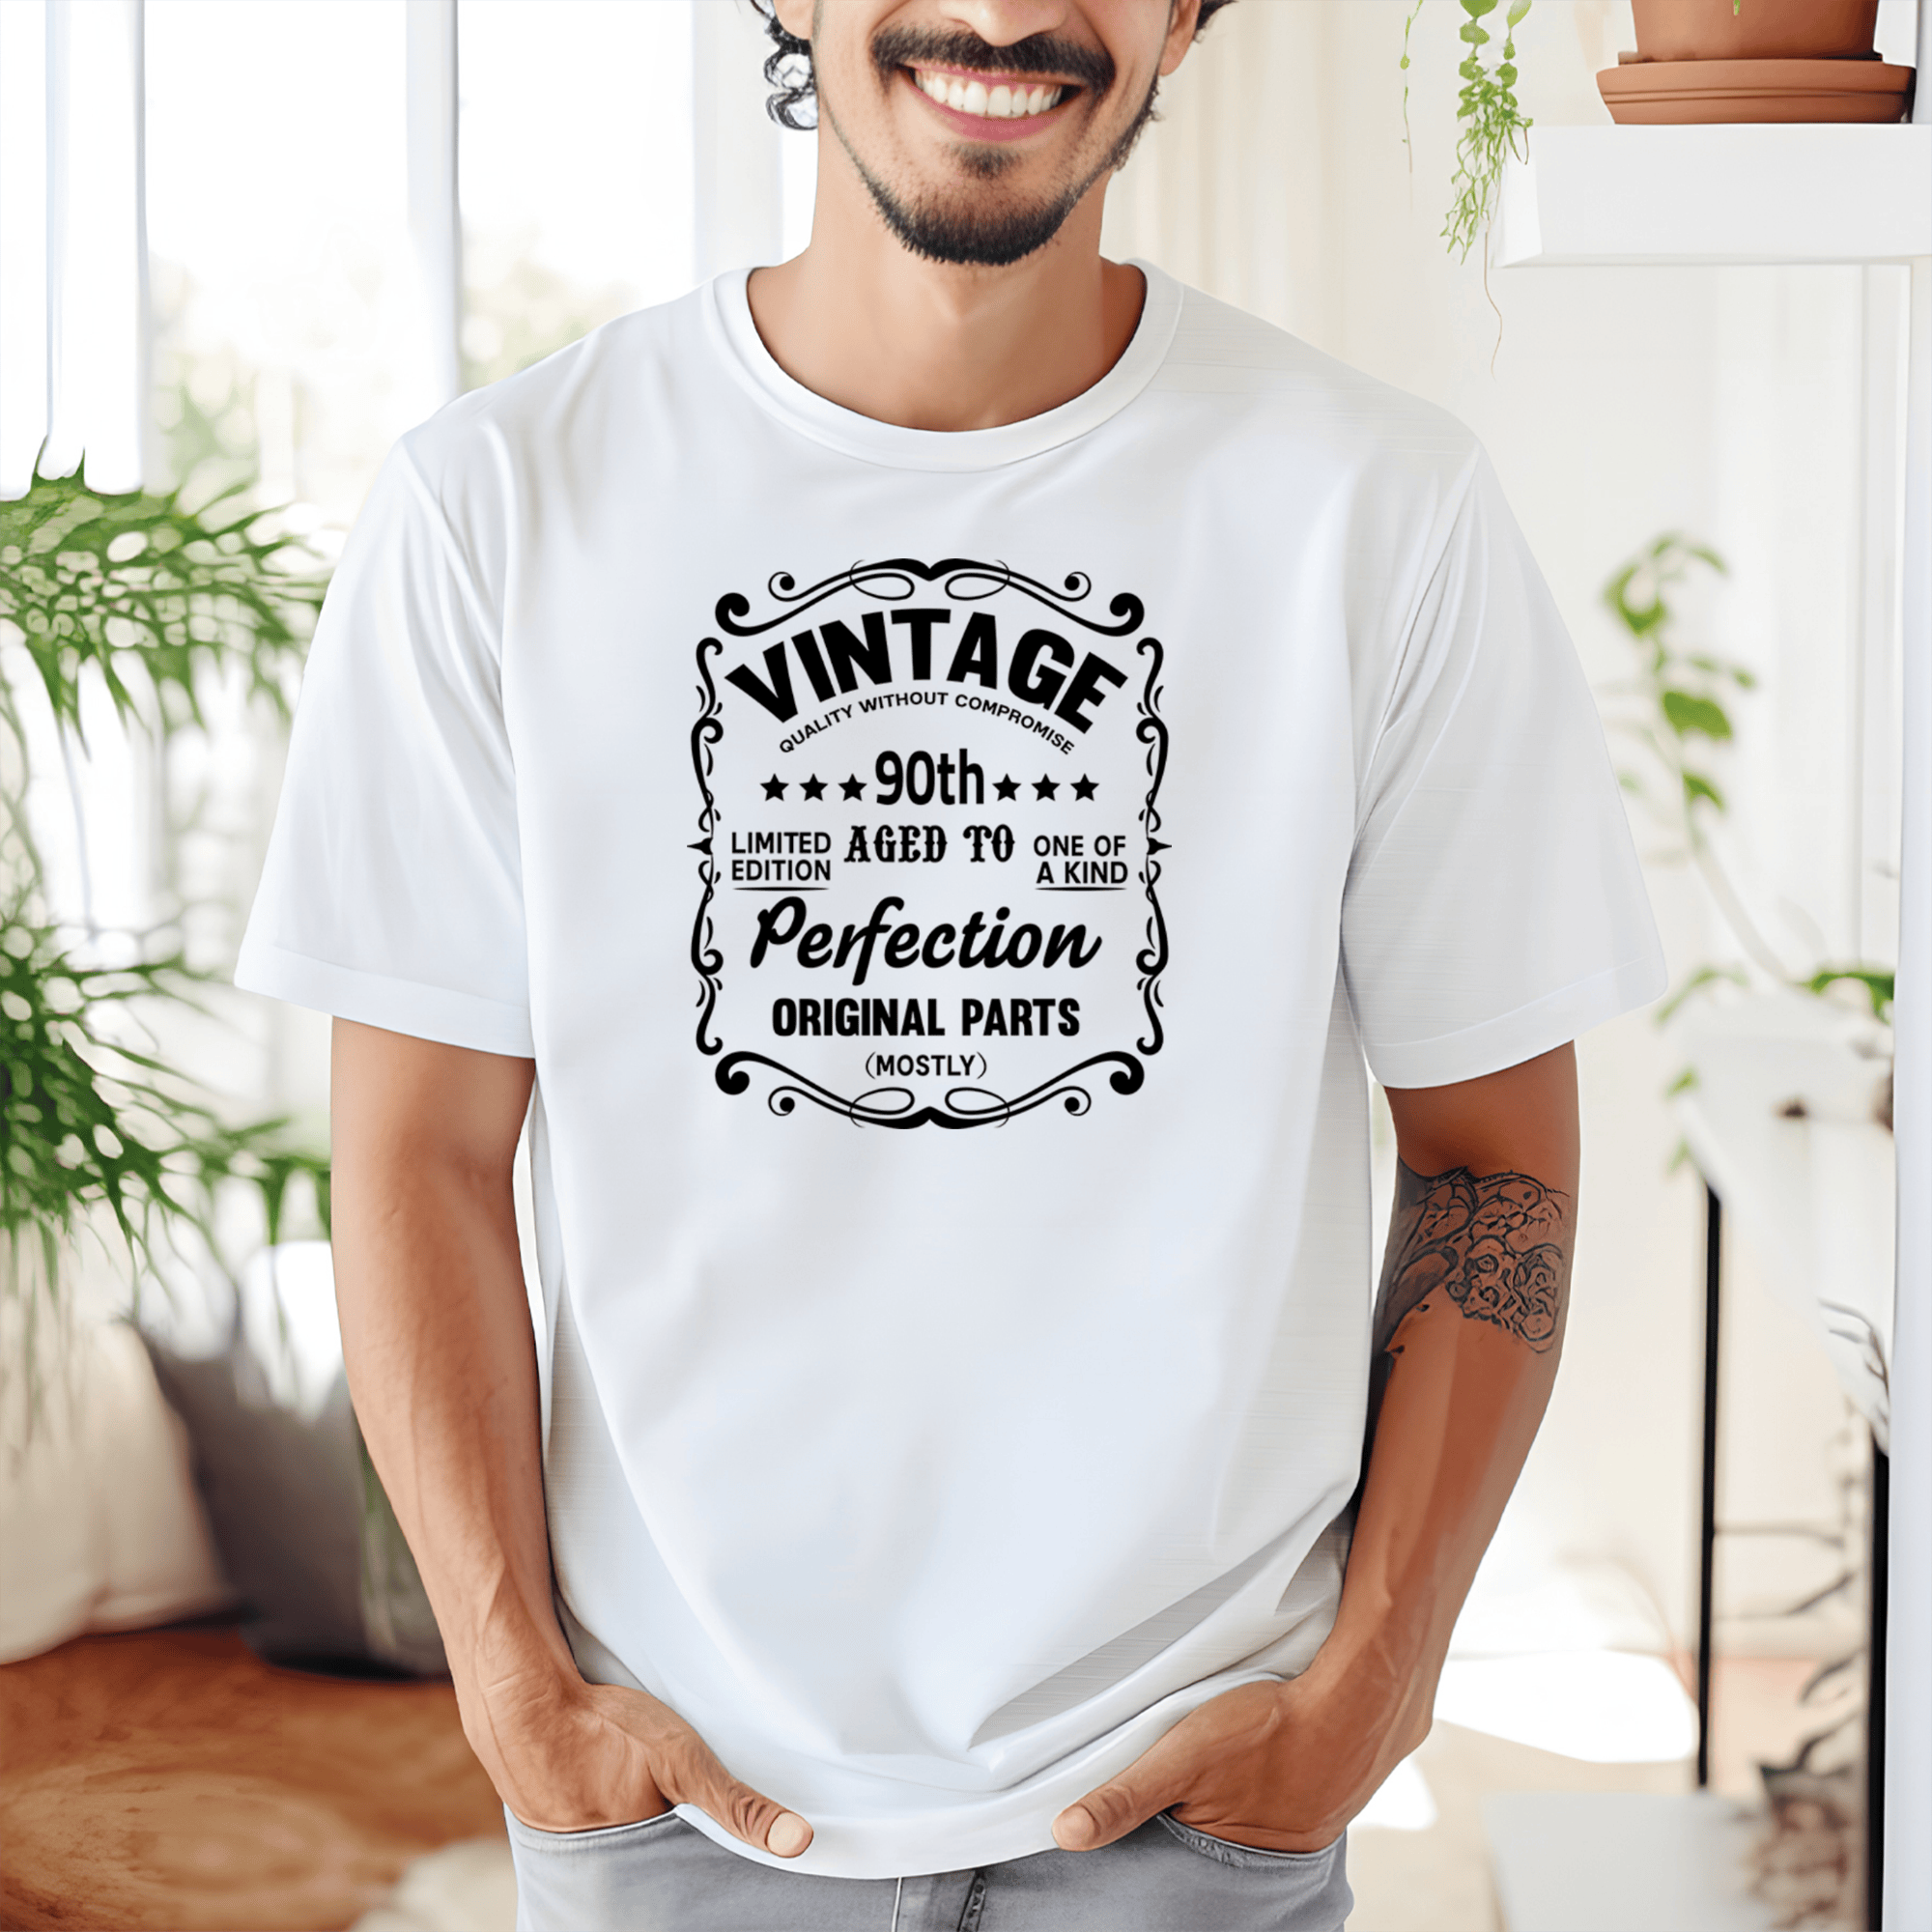 Mens White T Shirt with 90th-Vintage design